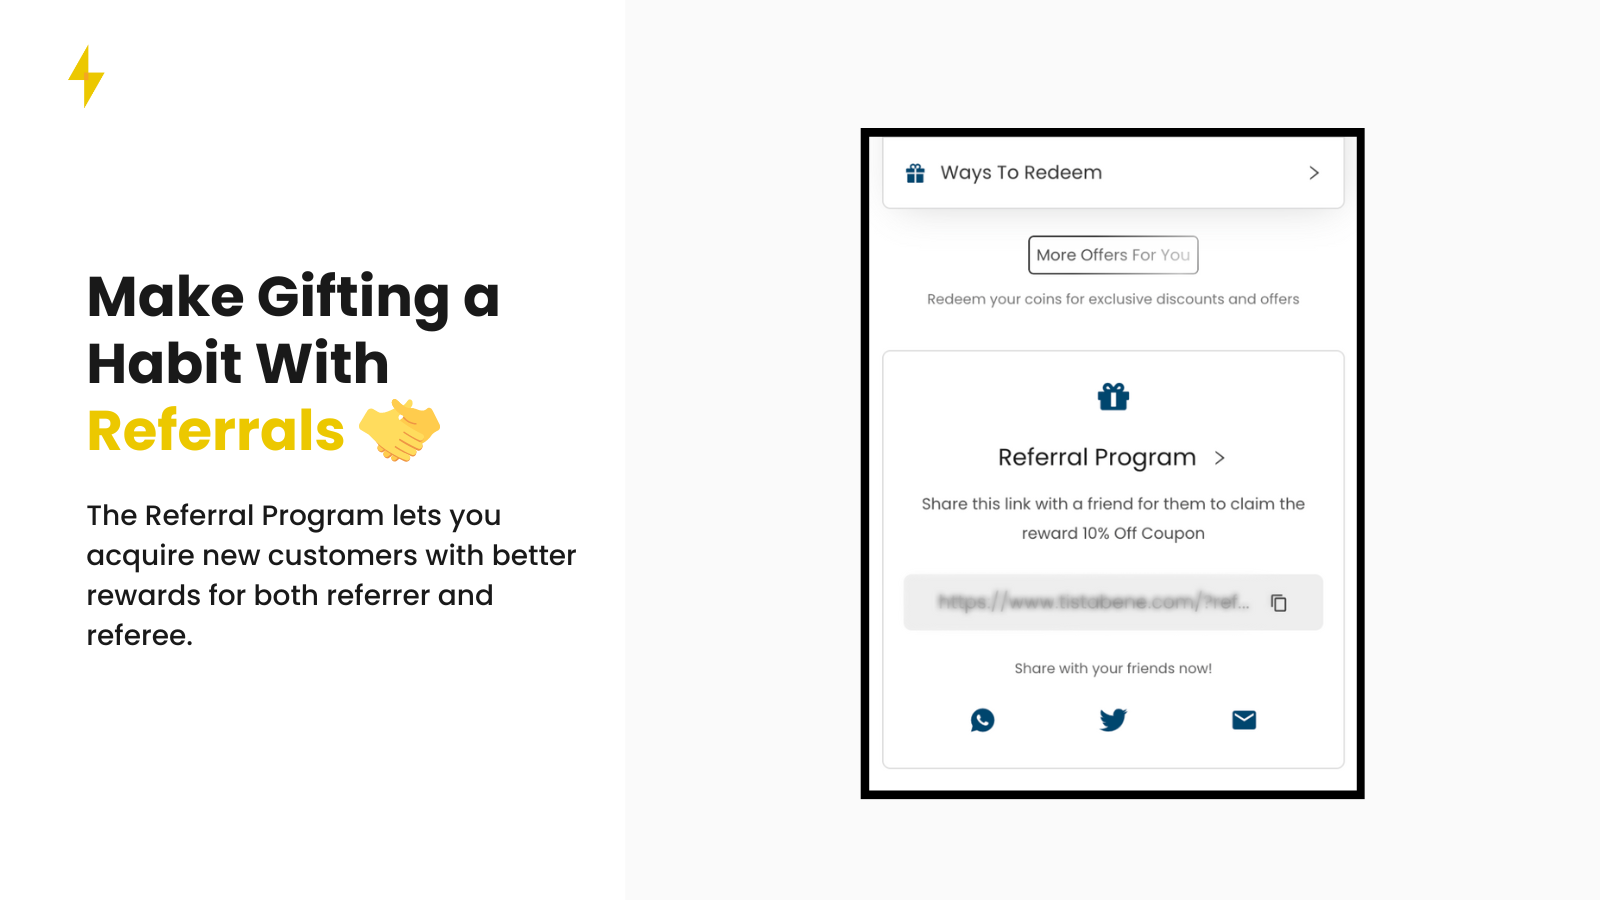 The Referral Program lets you acquire new users with less effort